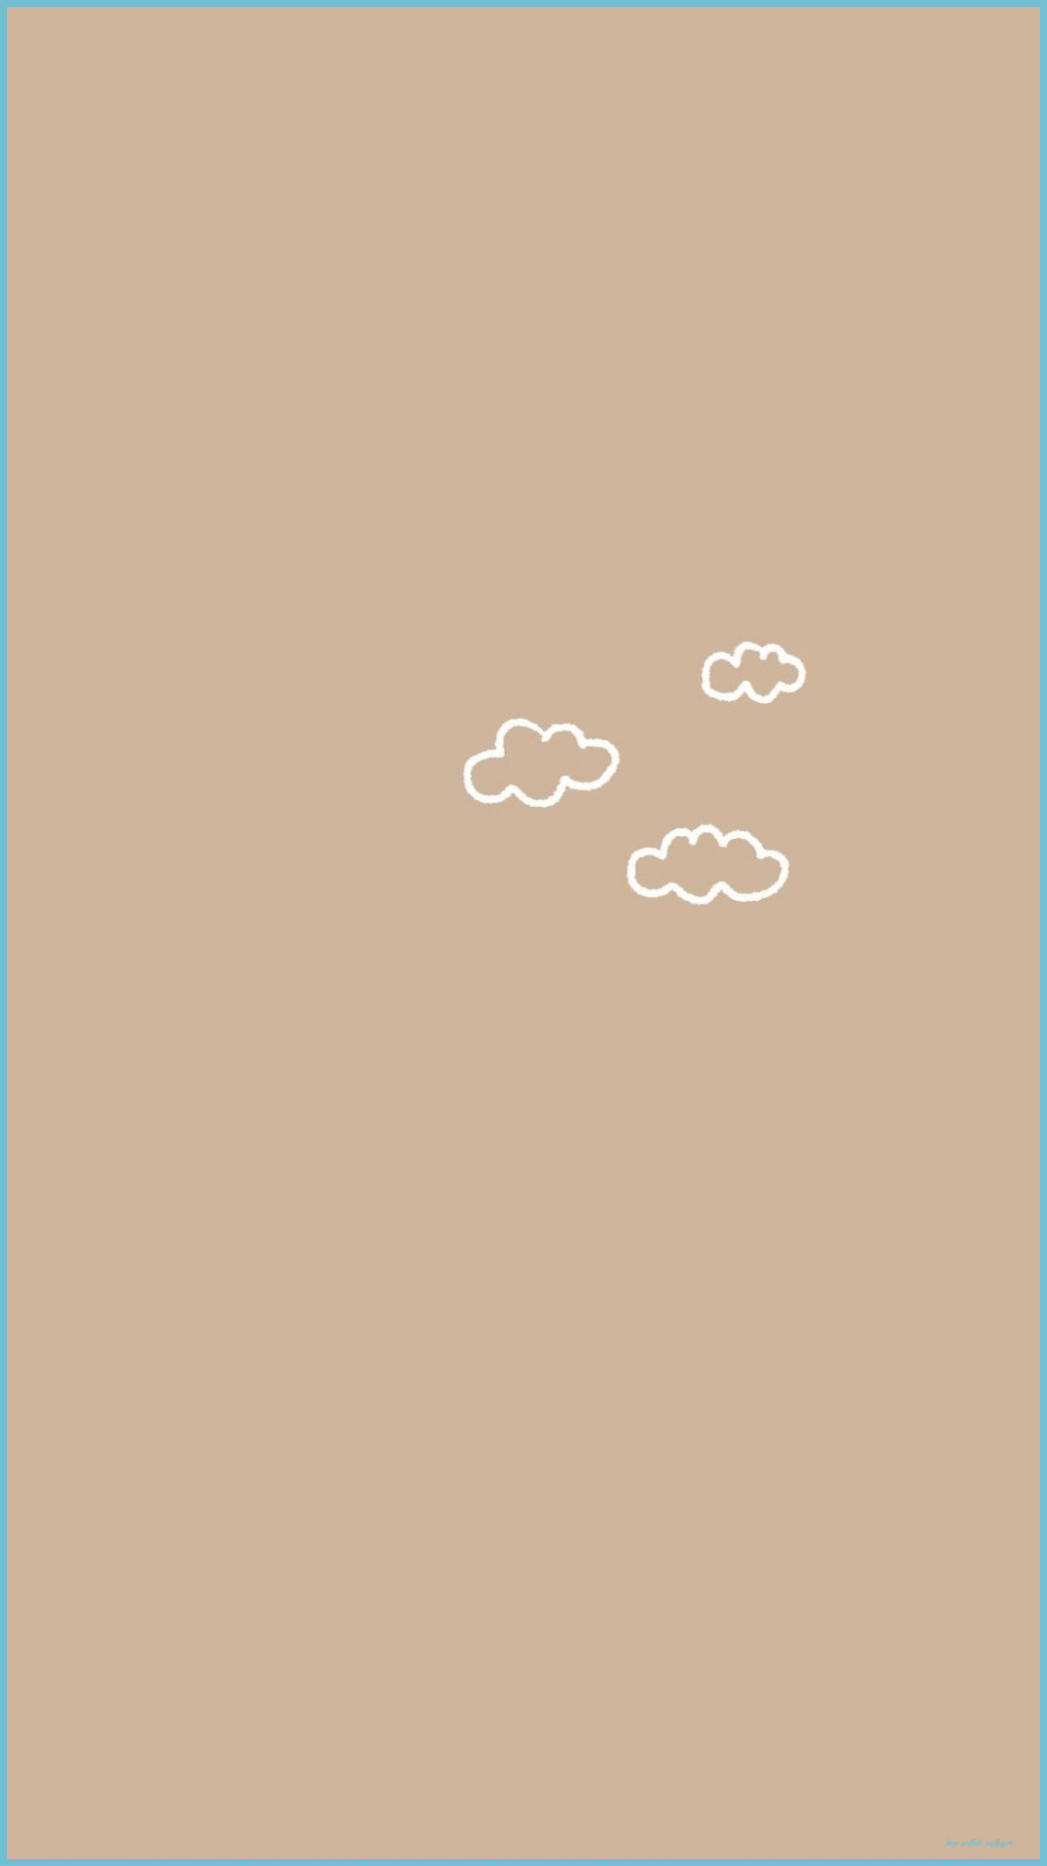 White Clouds On Beige Brown Aesthetic Wallpaper